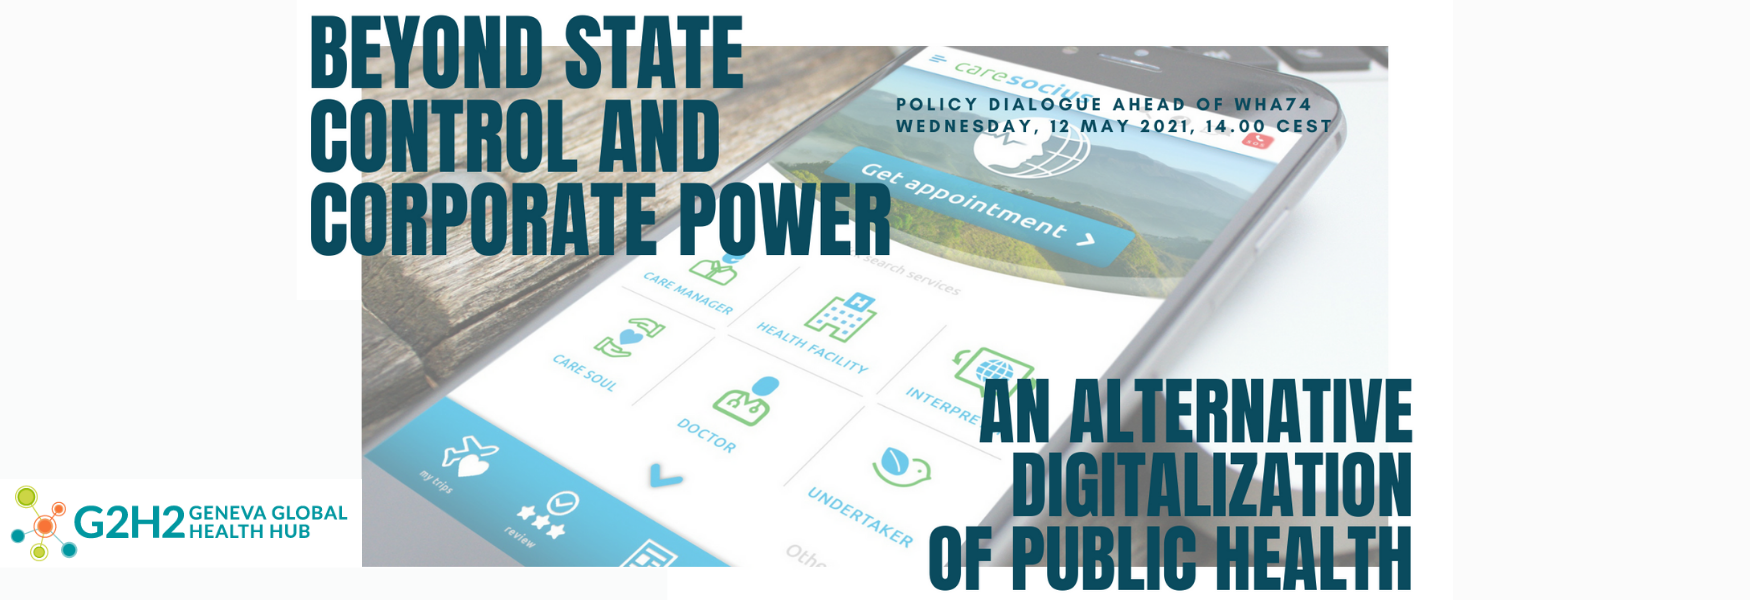 Beyond State Control and Corporate Power: An Alternative Digitalization of Public Health